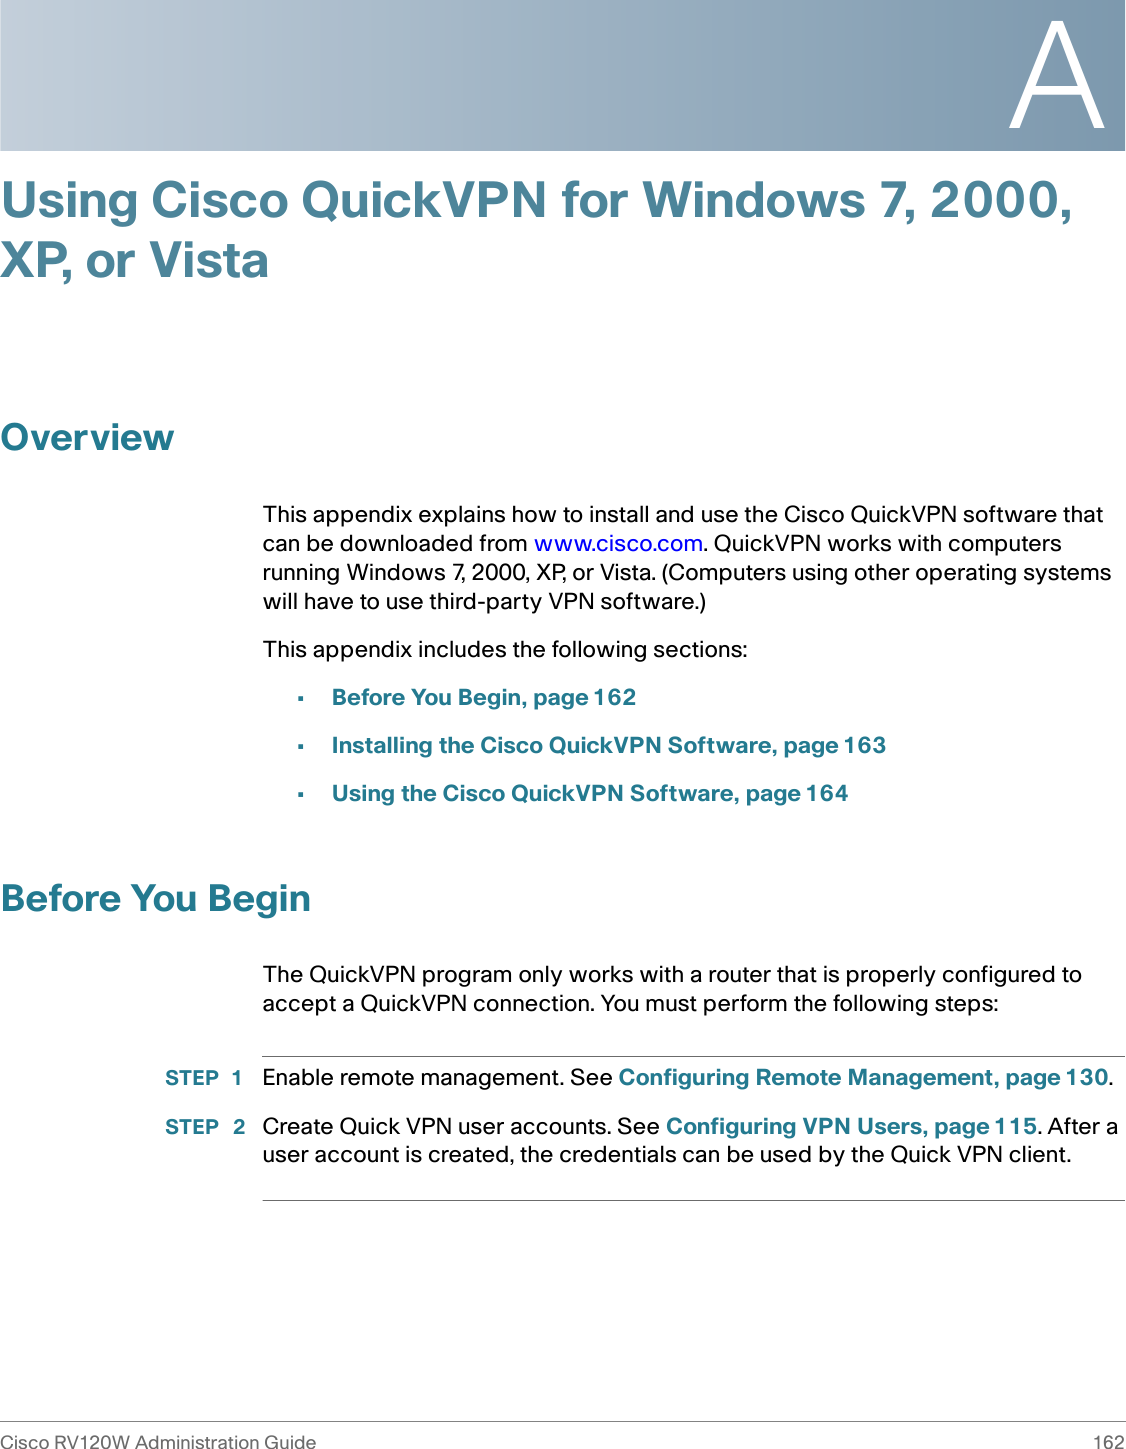 ACisco RV120W Administration Guide 162 Using Cisco QuickVPN for Windows 7, 2000, XP, or VistaOverviewThis appendix explains how to install and use the Cisco QuickVPN software that can be downloaded from www.cisco.com. QuickVPN works with computers running Windows 7, 2000, XP, or Vista. (Computers using other operating systems will have to use third-party VPN software.) This appendix includes the following sections:•Before You Begin, page162•Installing the Cisco QuickVPN Software, page 163•Using the Cisco QuickVPN Software, page 164Before You BeginThe QuickVPN program only works with a router that is properly configured to accept a QuickVPN connection. You must perform the following steps:STEP 1 Enable remote management. See Configuring Remote Management, page 130.STEP  2 Create Quick VPN user accounts. See Configuring VPN Users, page 115. After a user account is created, the credentials can be used by the Quick VPN client.